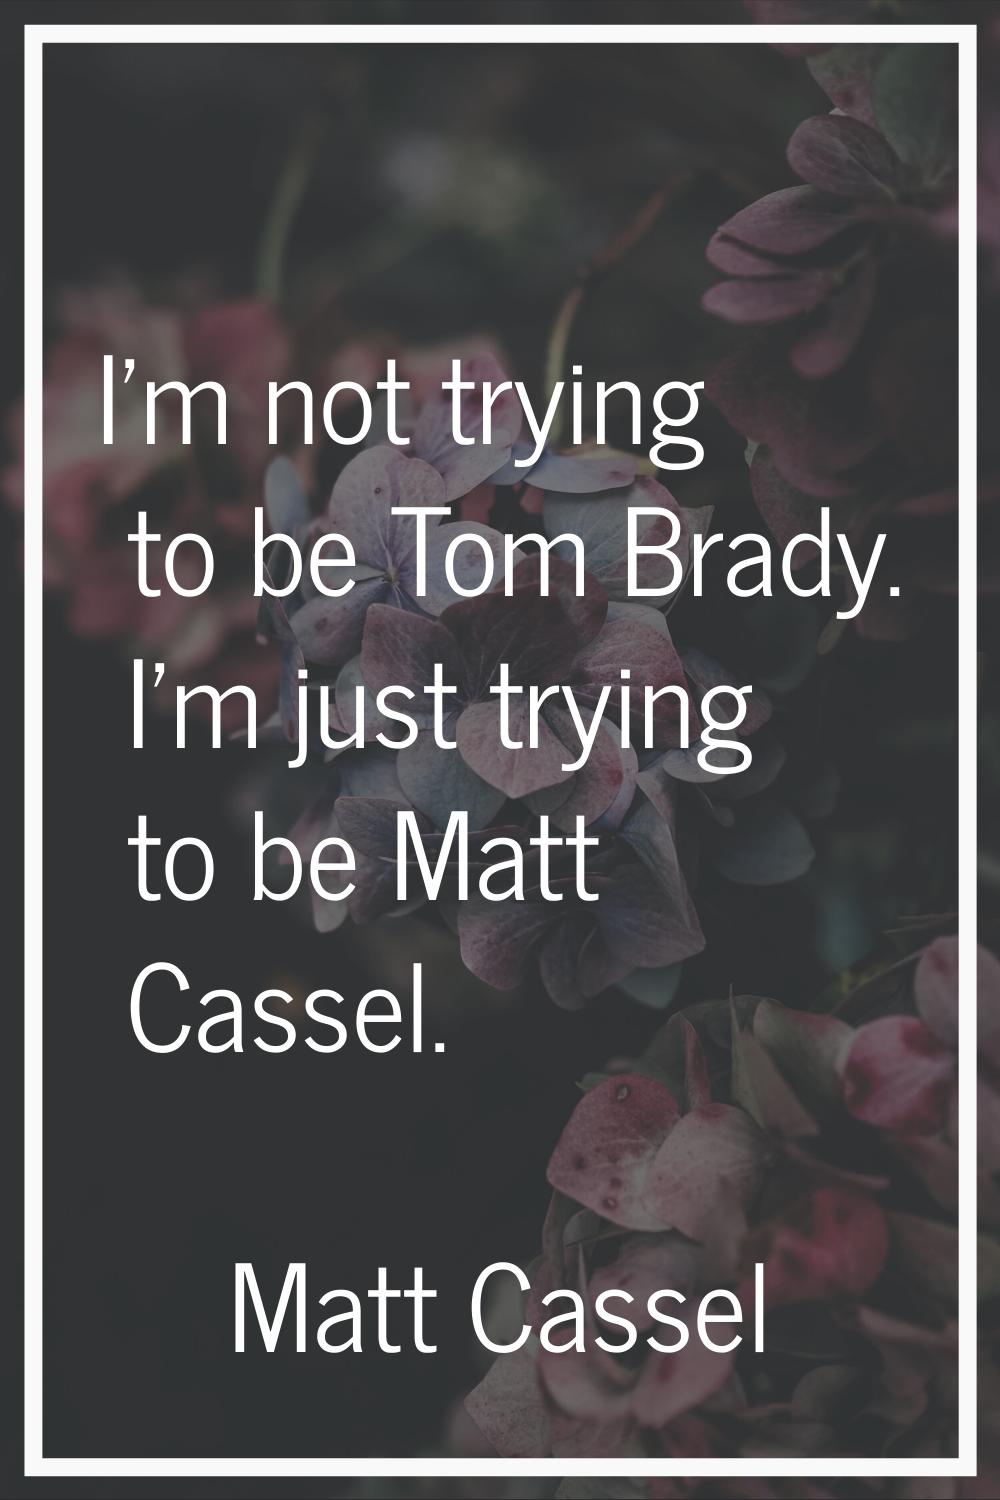 I'm not trying to be Tom Brady. I'm just trying to be Matt Cassel.